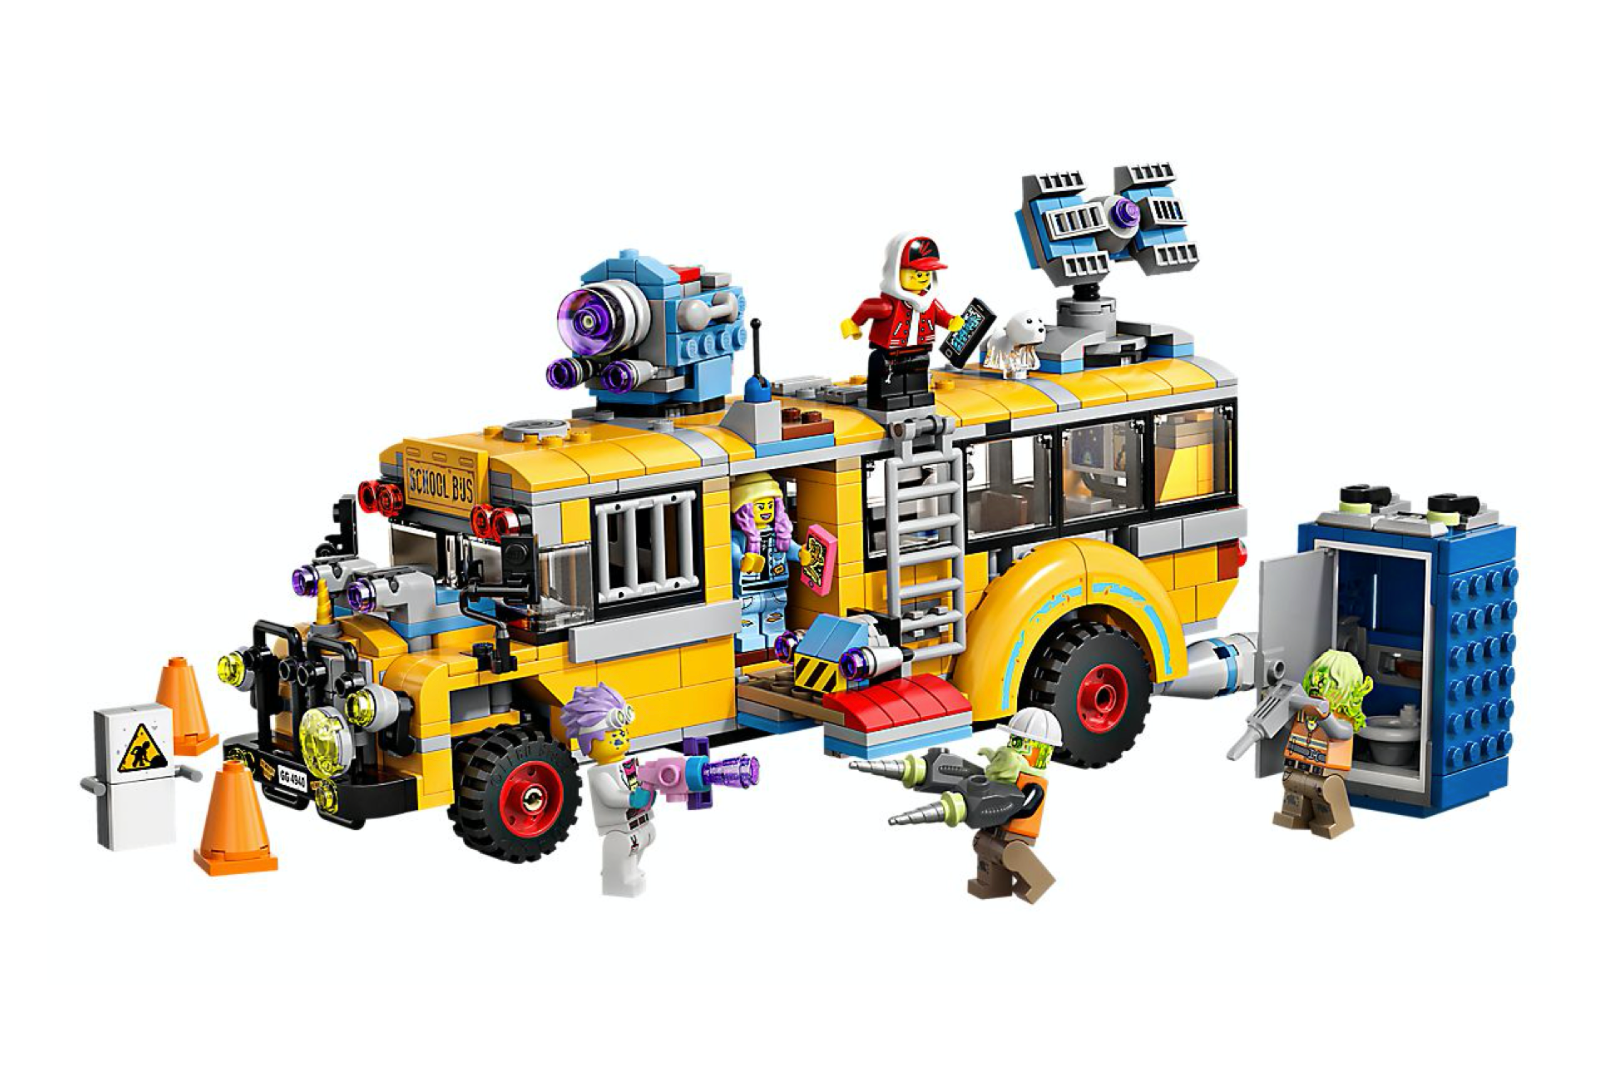 10 best Lego sets 2020 Our favourite Star Wars, Technic, City, Frozen II sets and more image 9